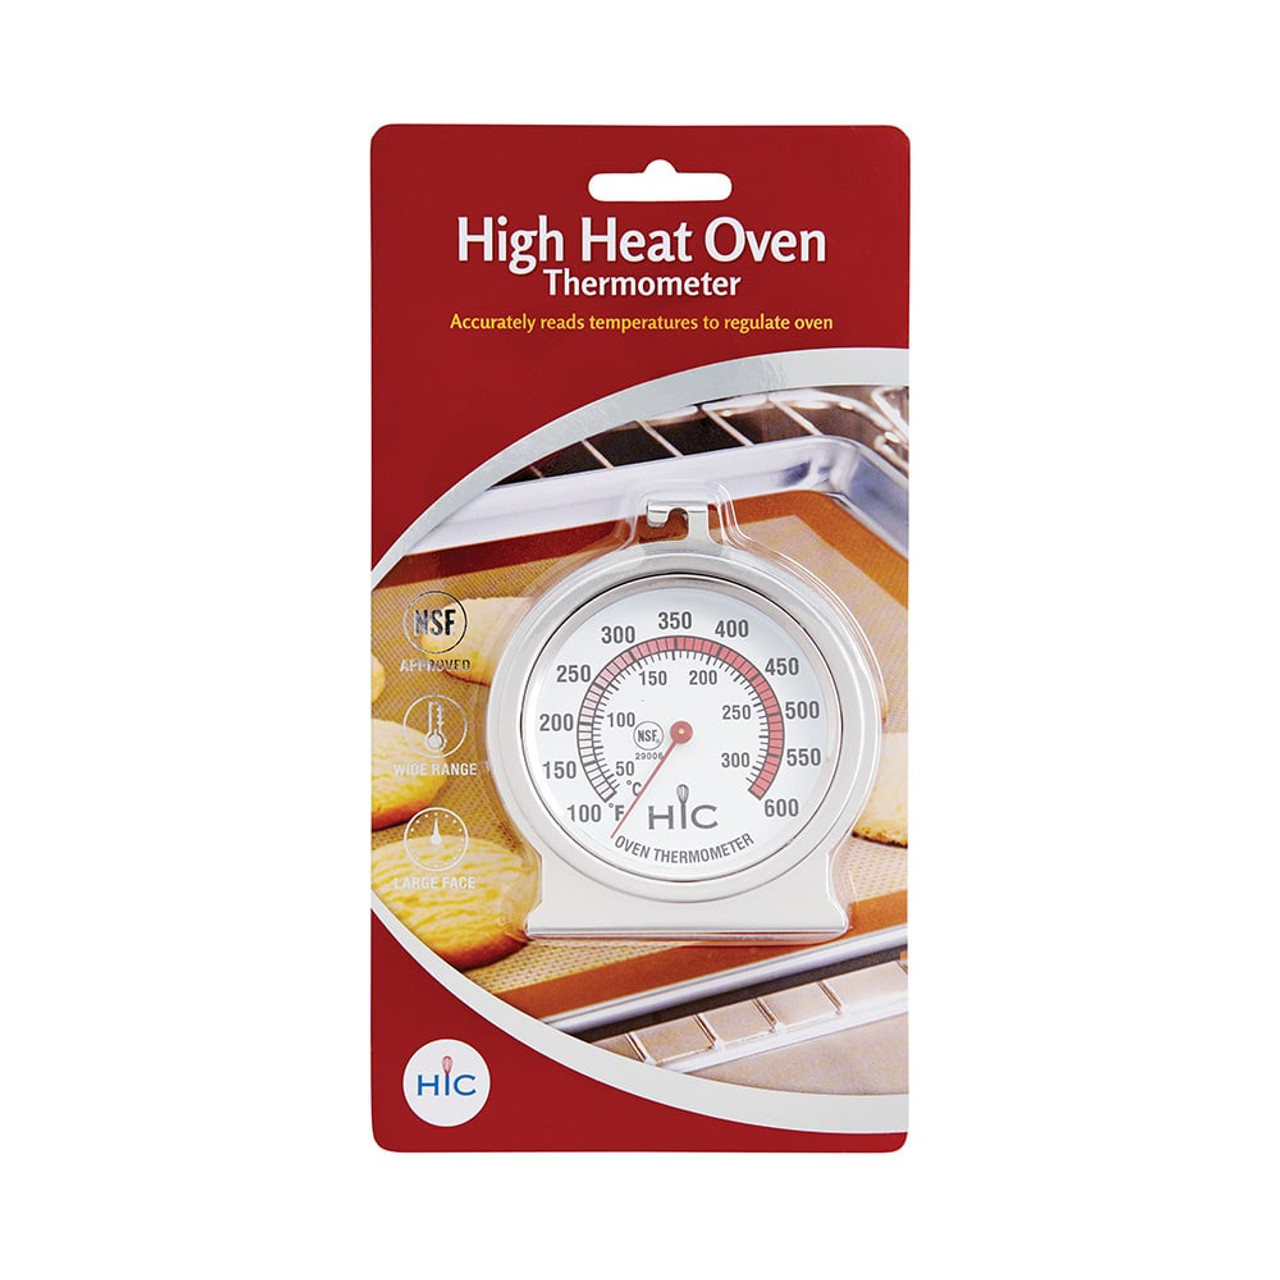 https://cdn11.bigcommerce.com/s-hccytny0od/images/stencil/1280x1280/products/2618/9220/oven-thermometer-3__21547.1563102917.jpg?c=2?imbypass=on